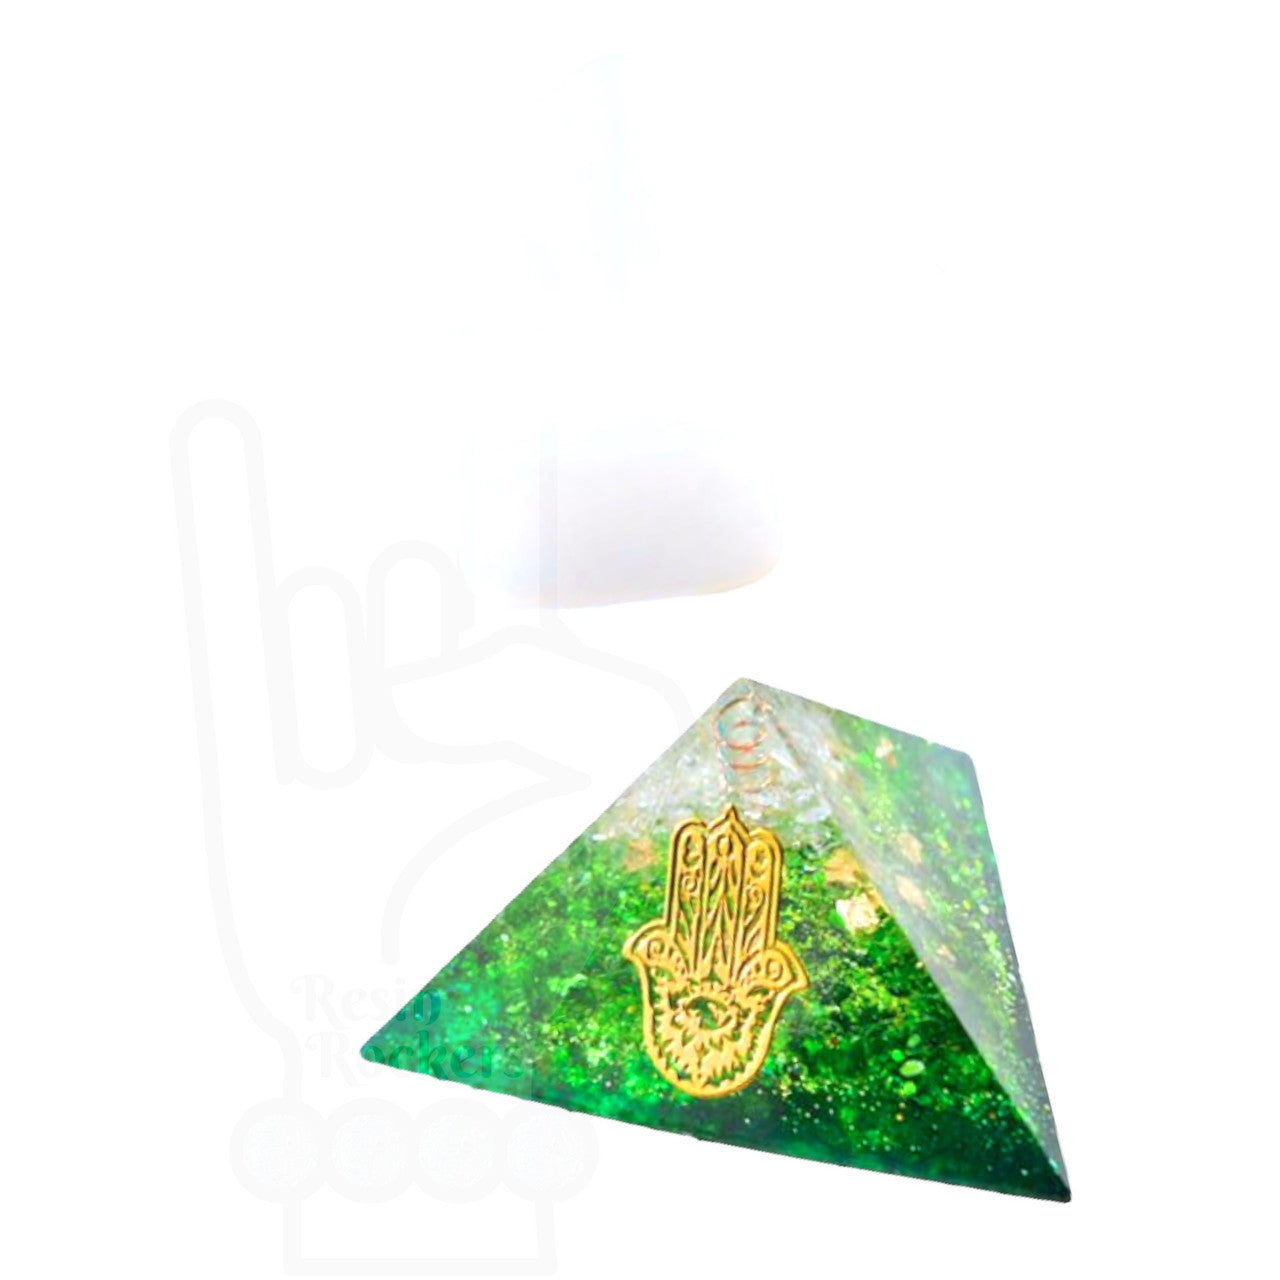 Small Deep Pour Pyramid Preservation Transparent Silicone Mold for Epoxy Resin Art